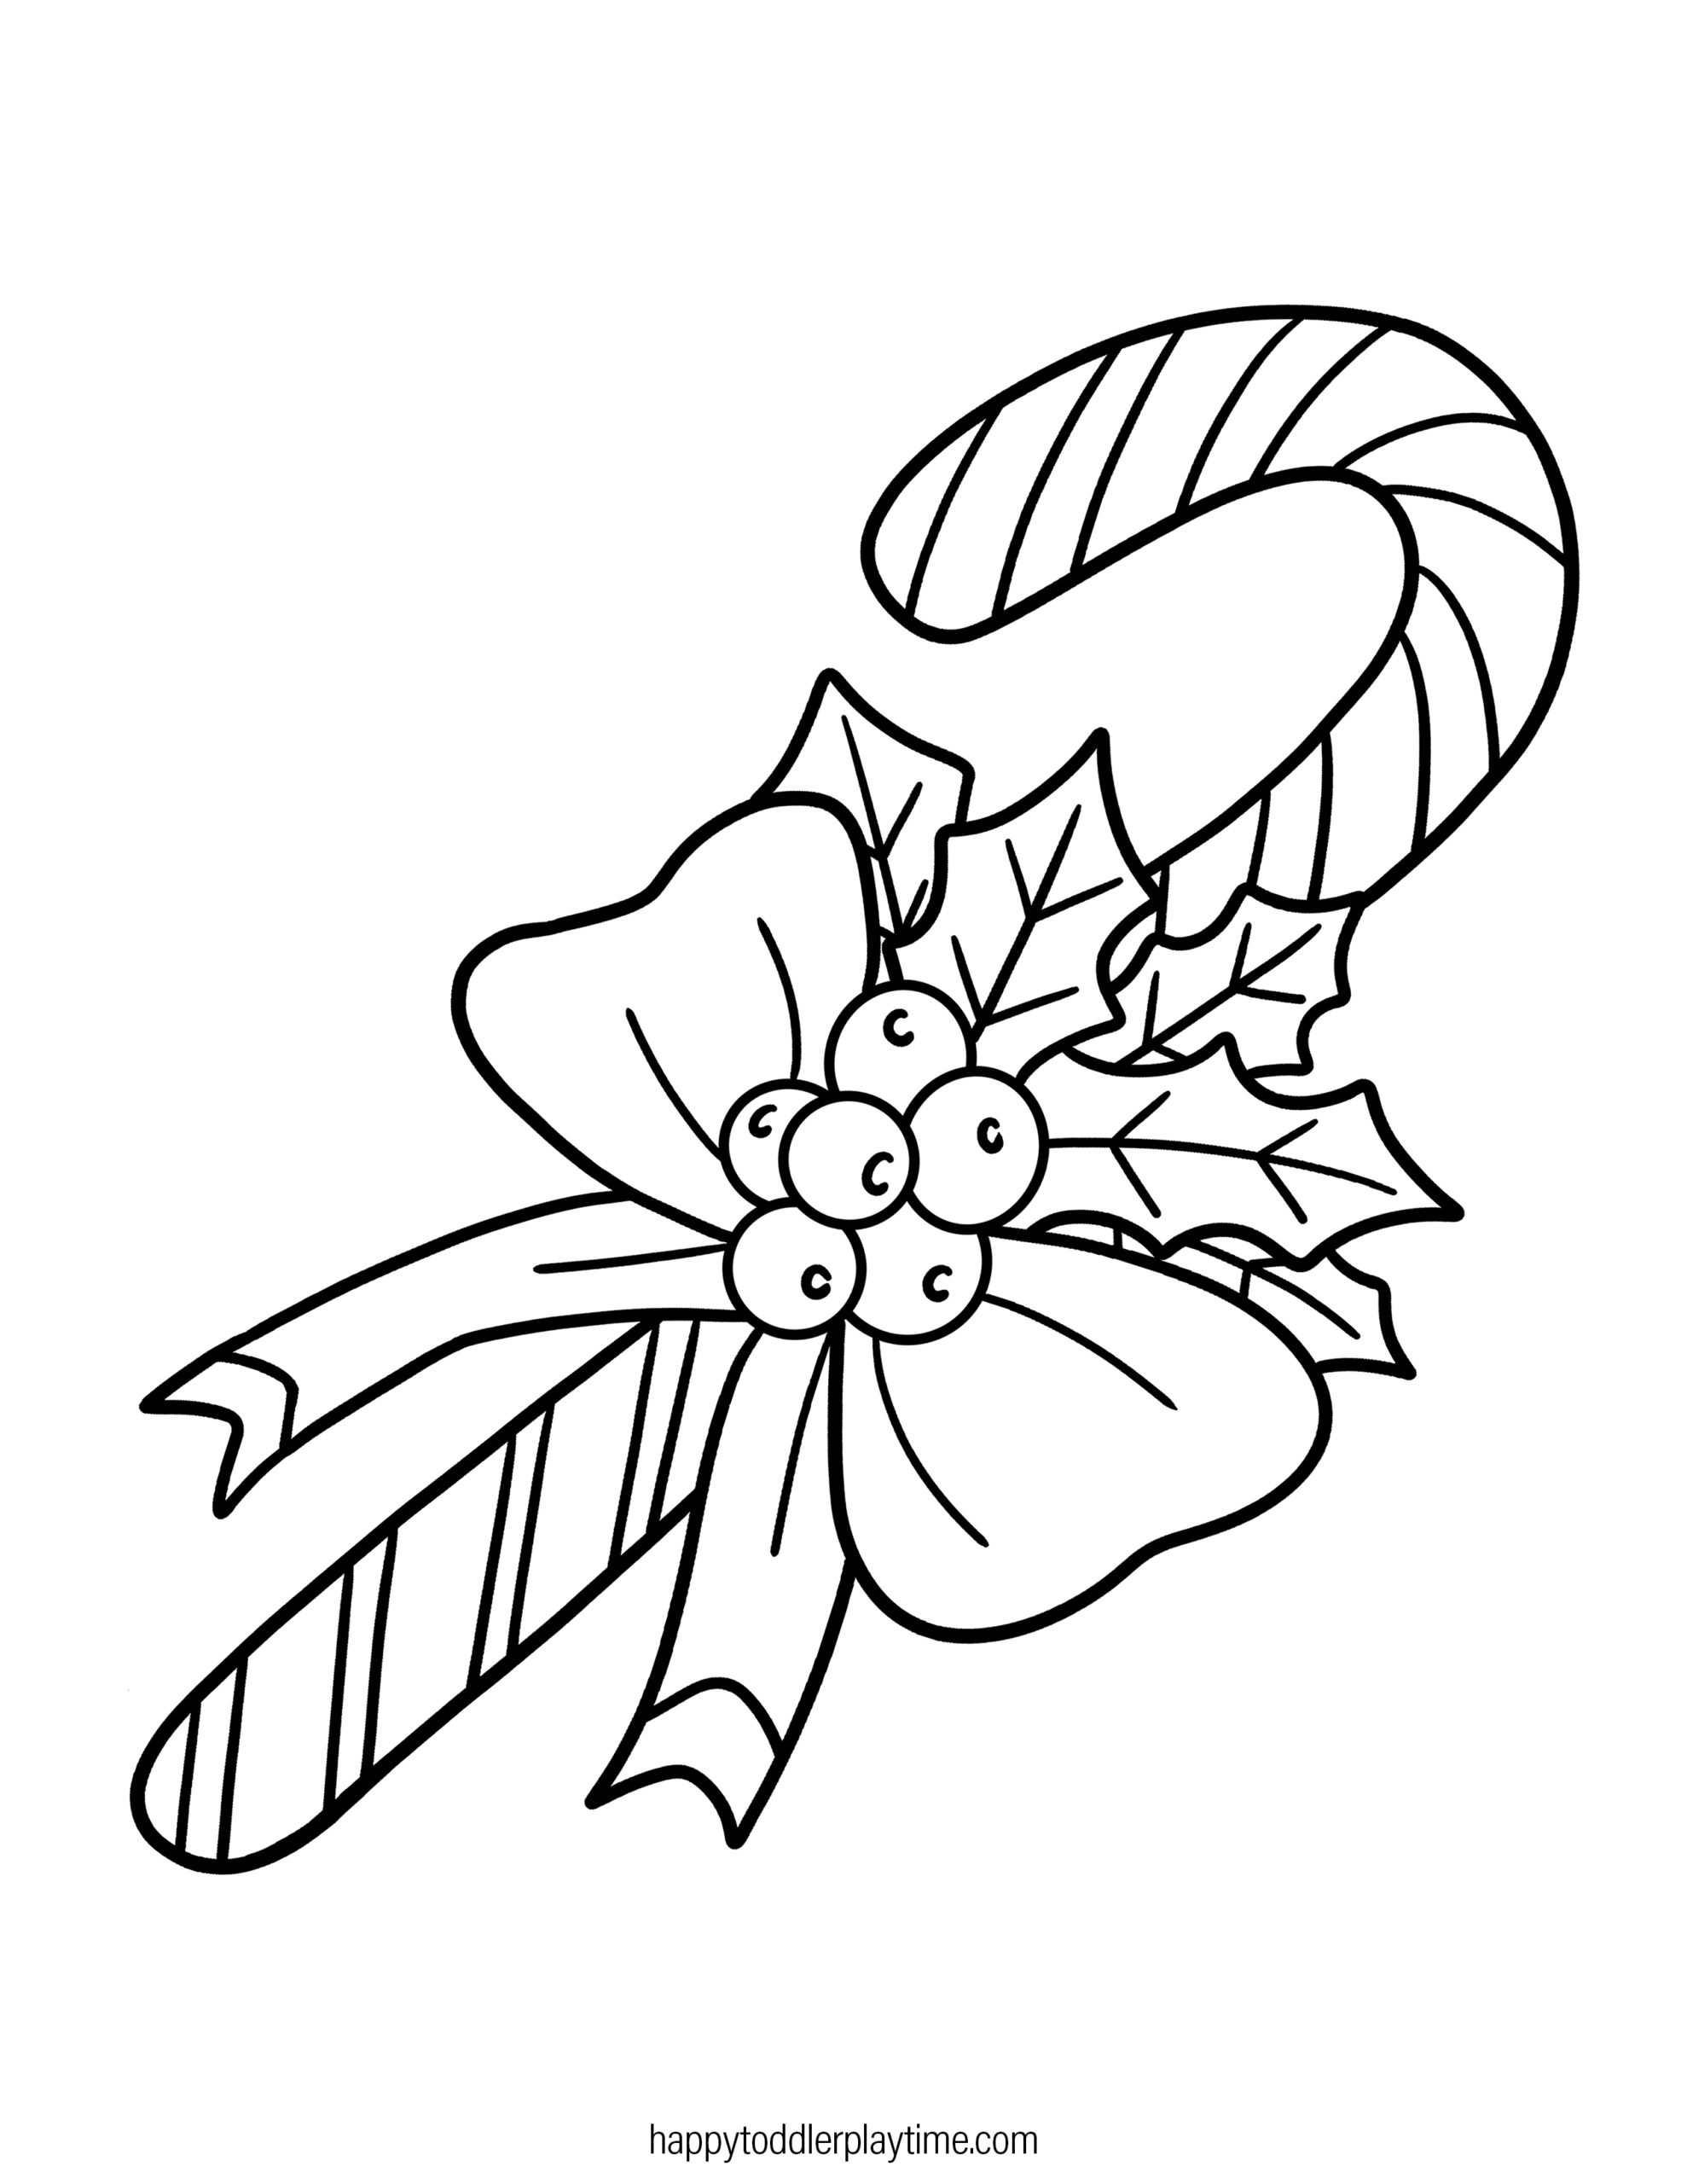 Free printable candy cane coloring pages for kids